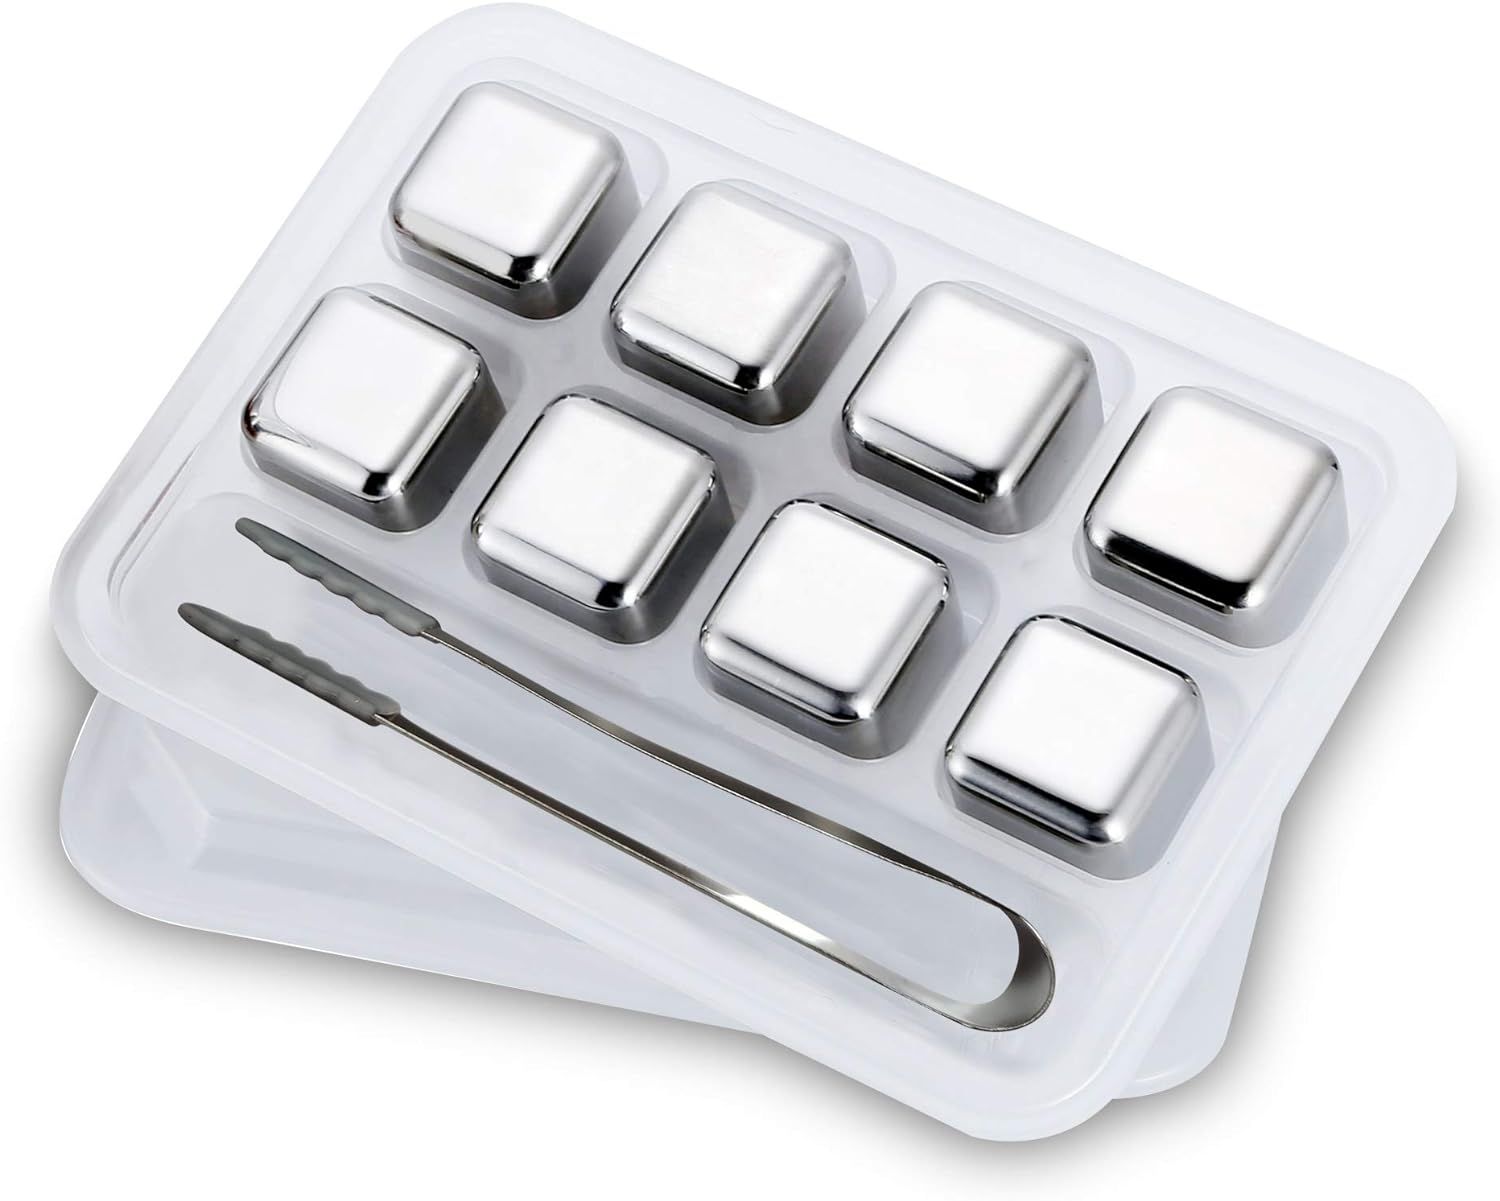 Tailored Royalty Reusable Stainless Steel Ice Cubes, 8PCS Whiskey Stones, Whiskey Cubes Tray and ... | Amazon (US)